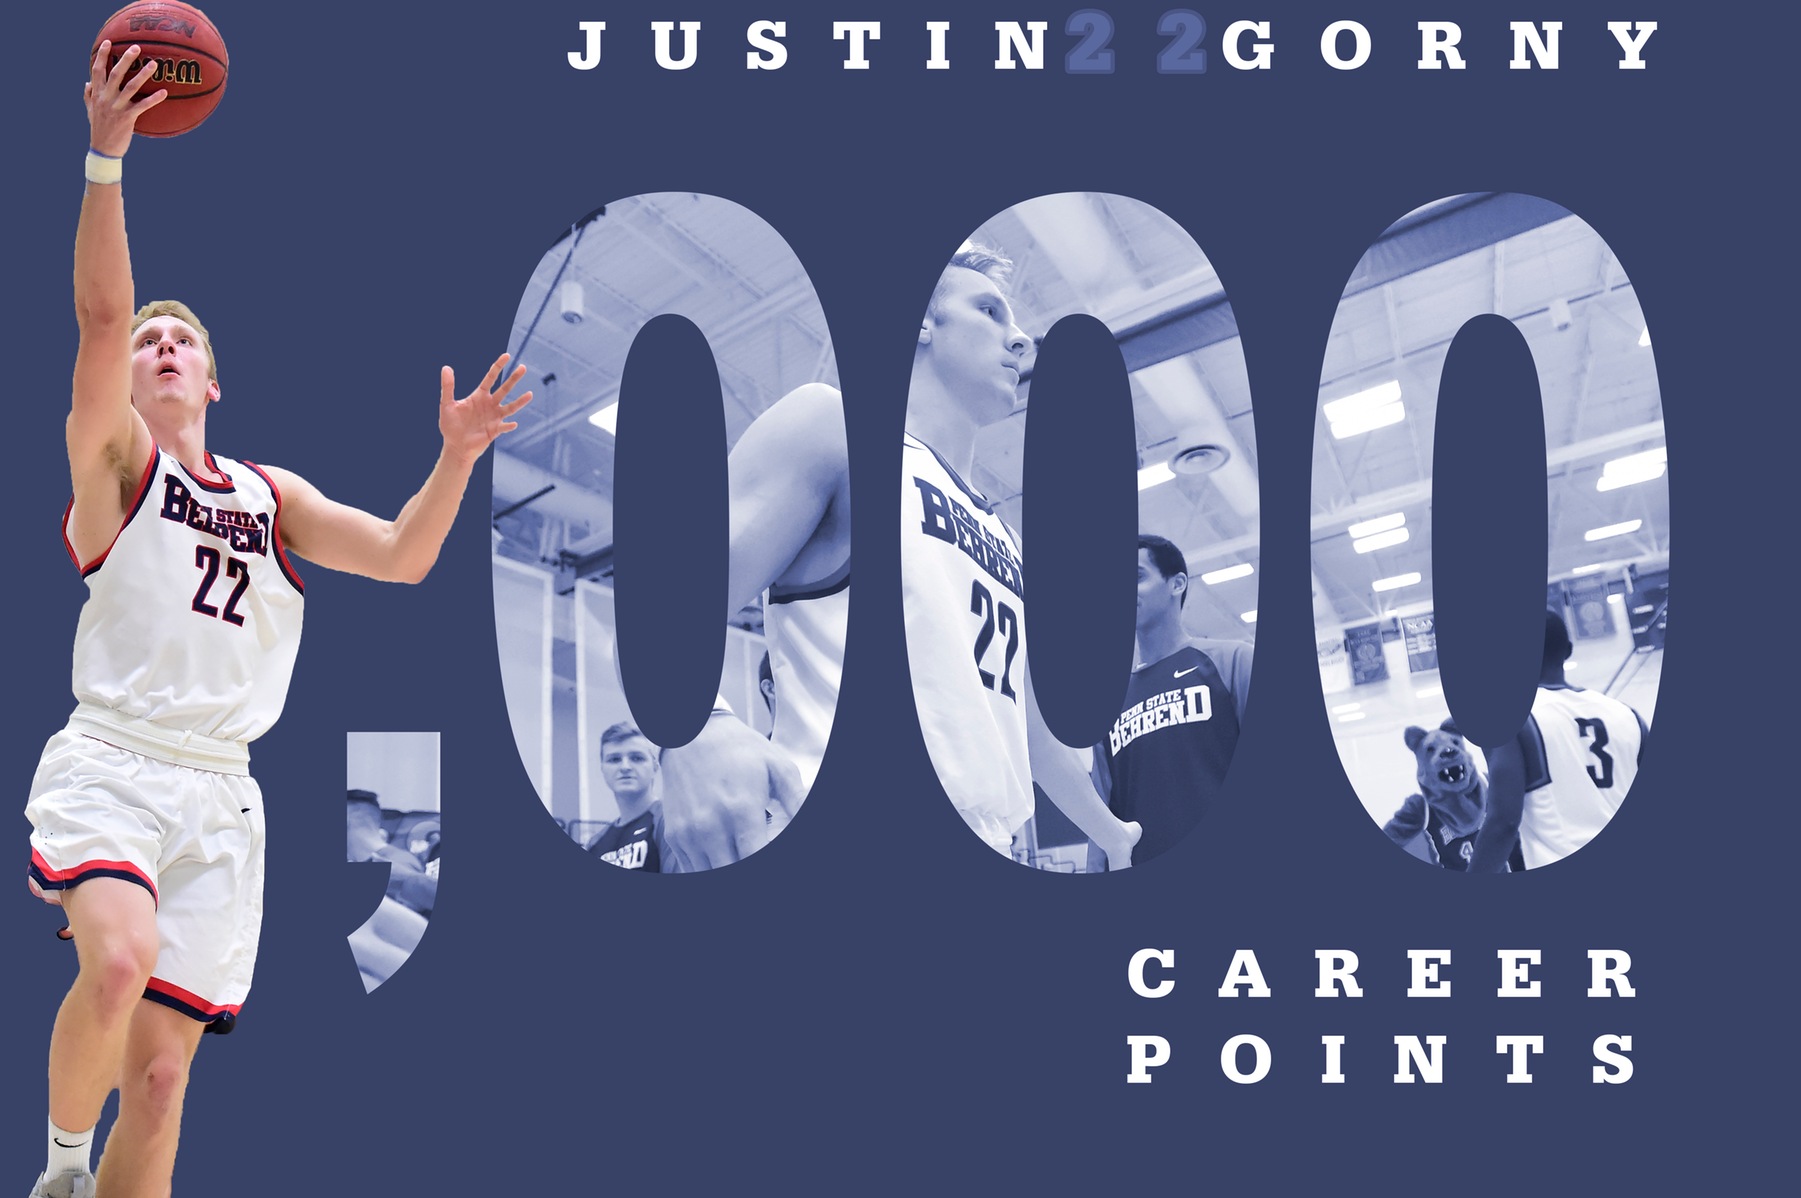 Gorny Reaches 1,000 Career Points; Lions Hold Off Altoona